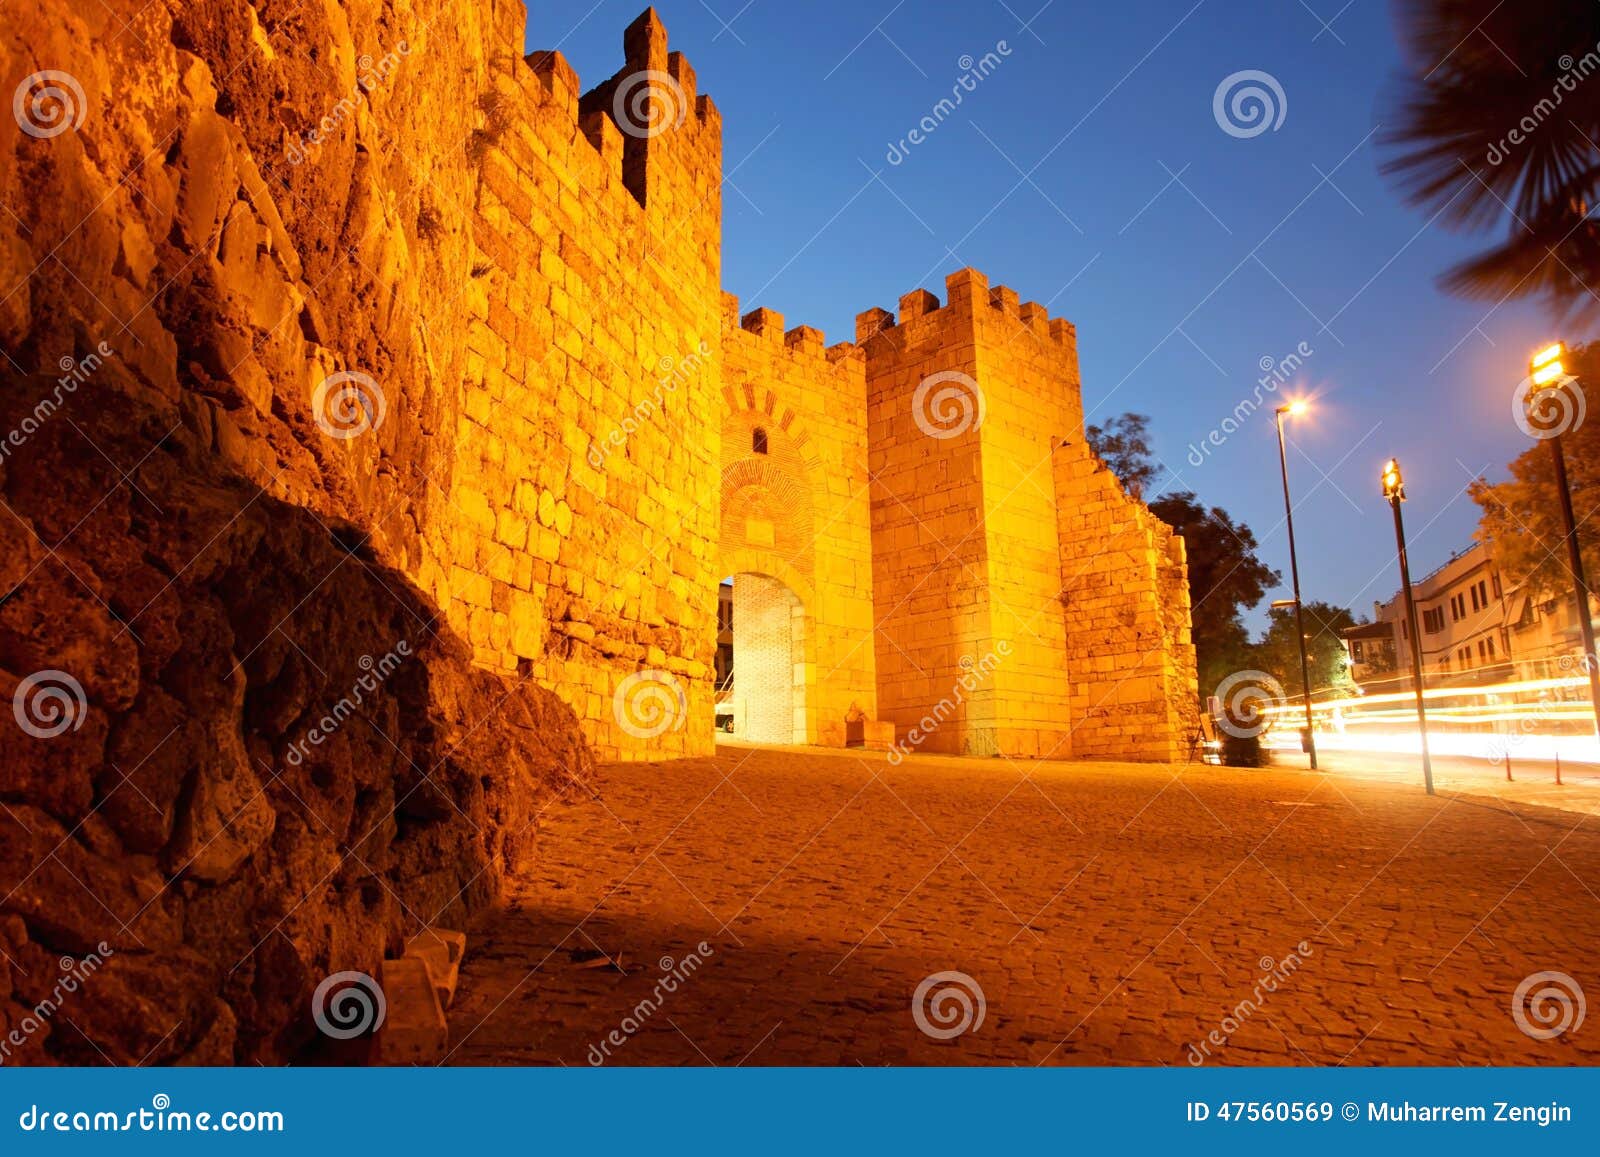 the medieval citywall